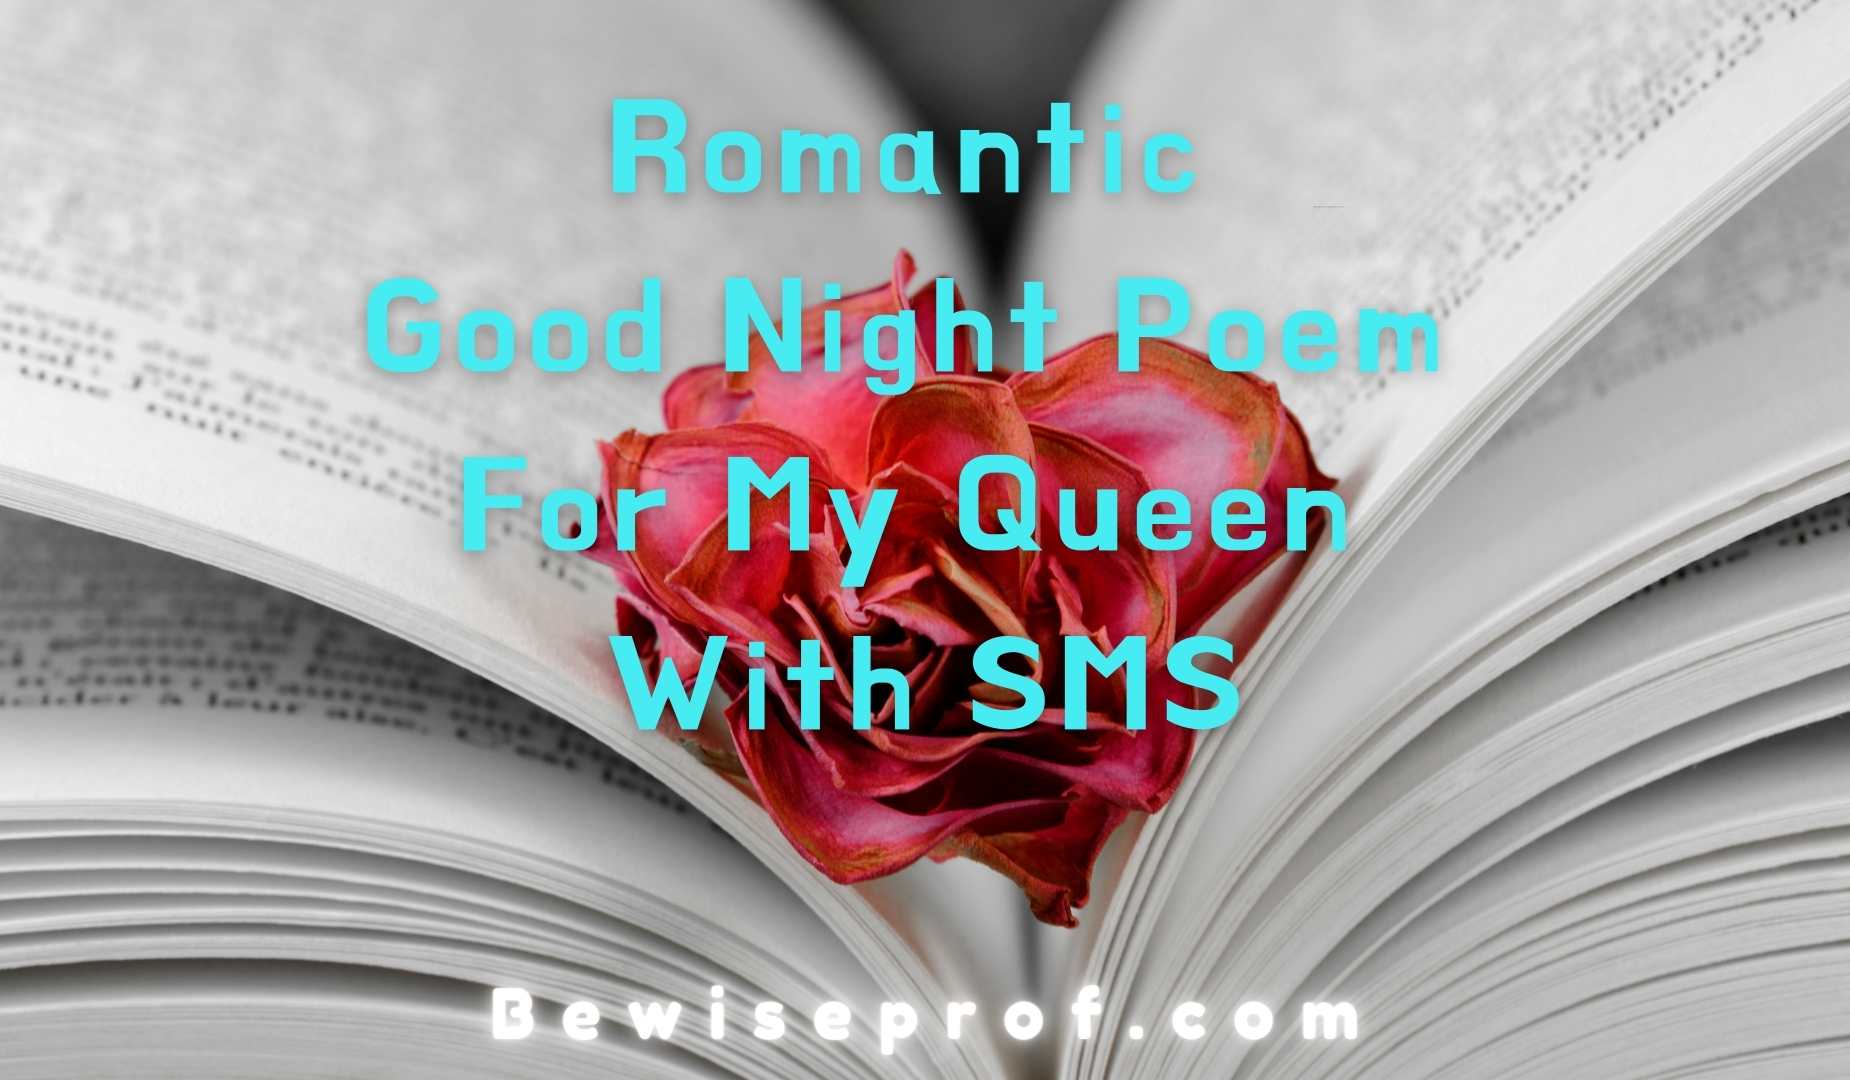 Romantic Good Night Poem For My Queen With SMS